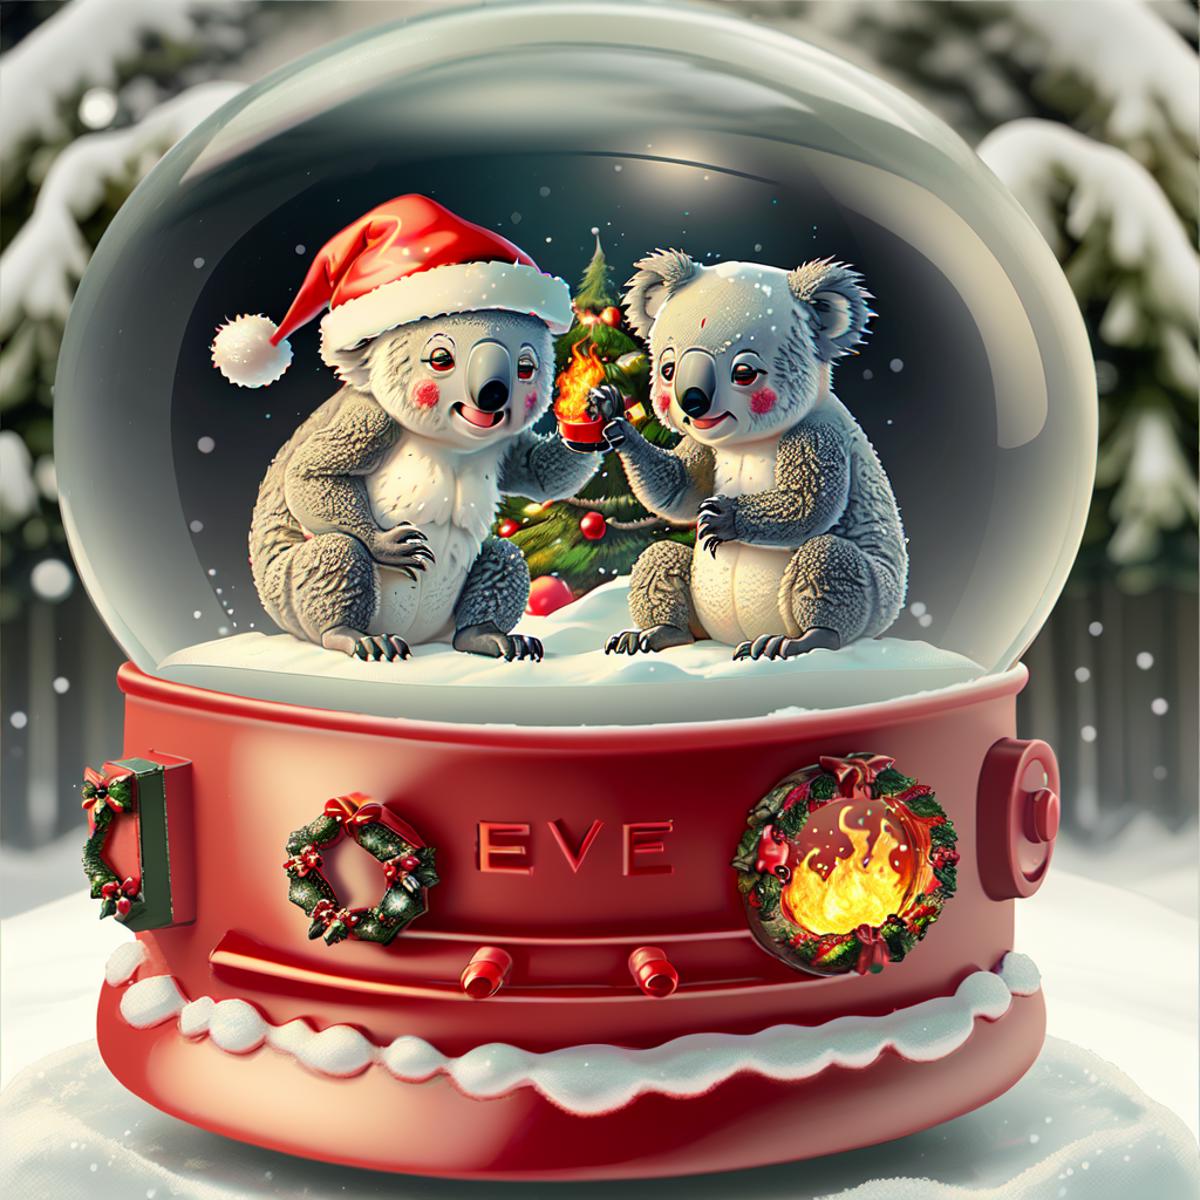 Snow Globes image by The_Strawberry